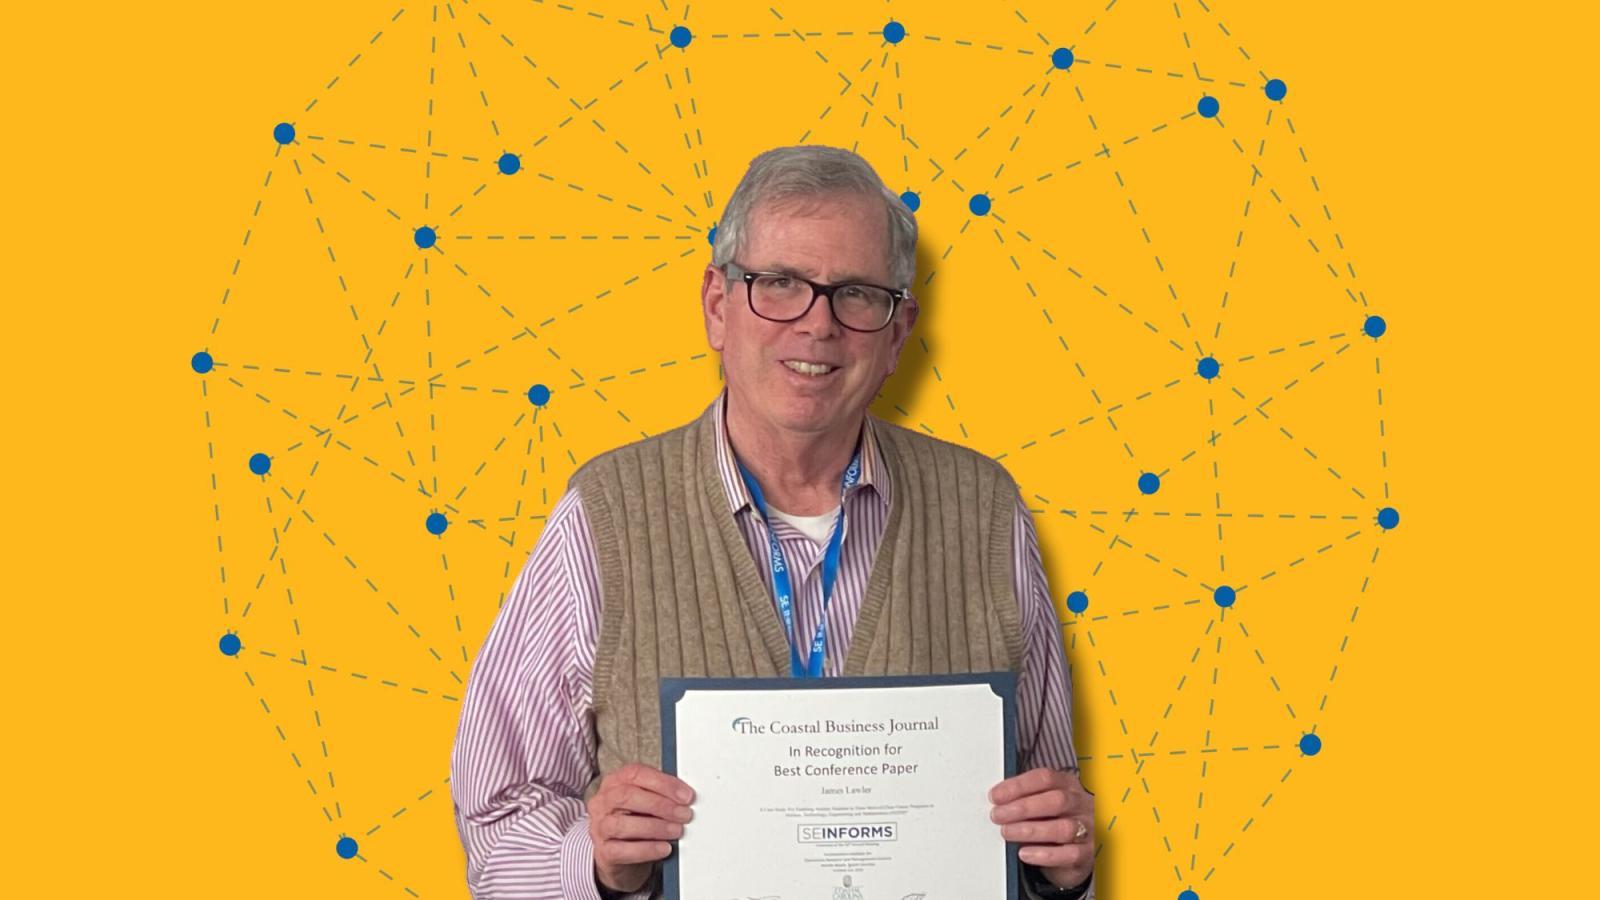 Dr. James Lawyer on a yellow graphic background holding up a certificate awarding him best paper at a conference.